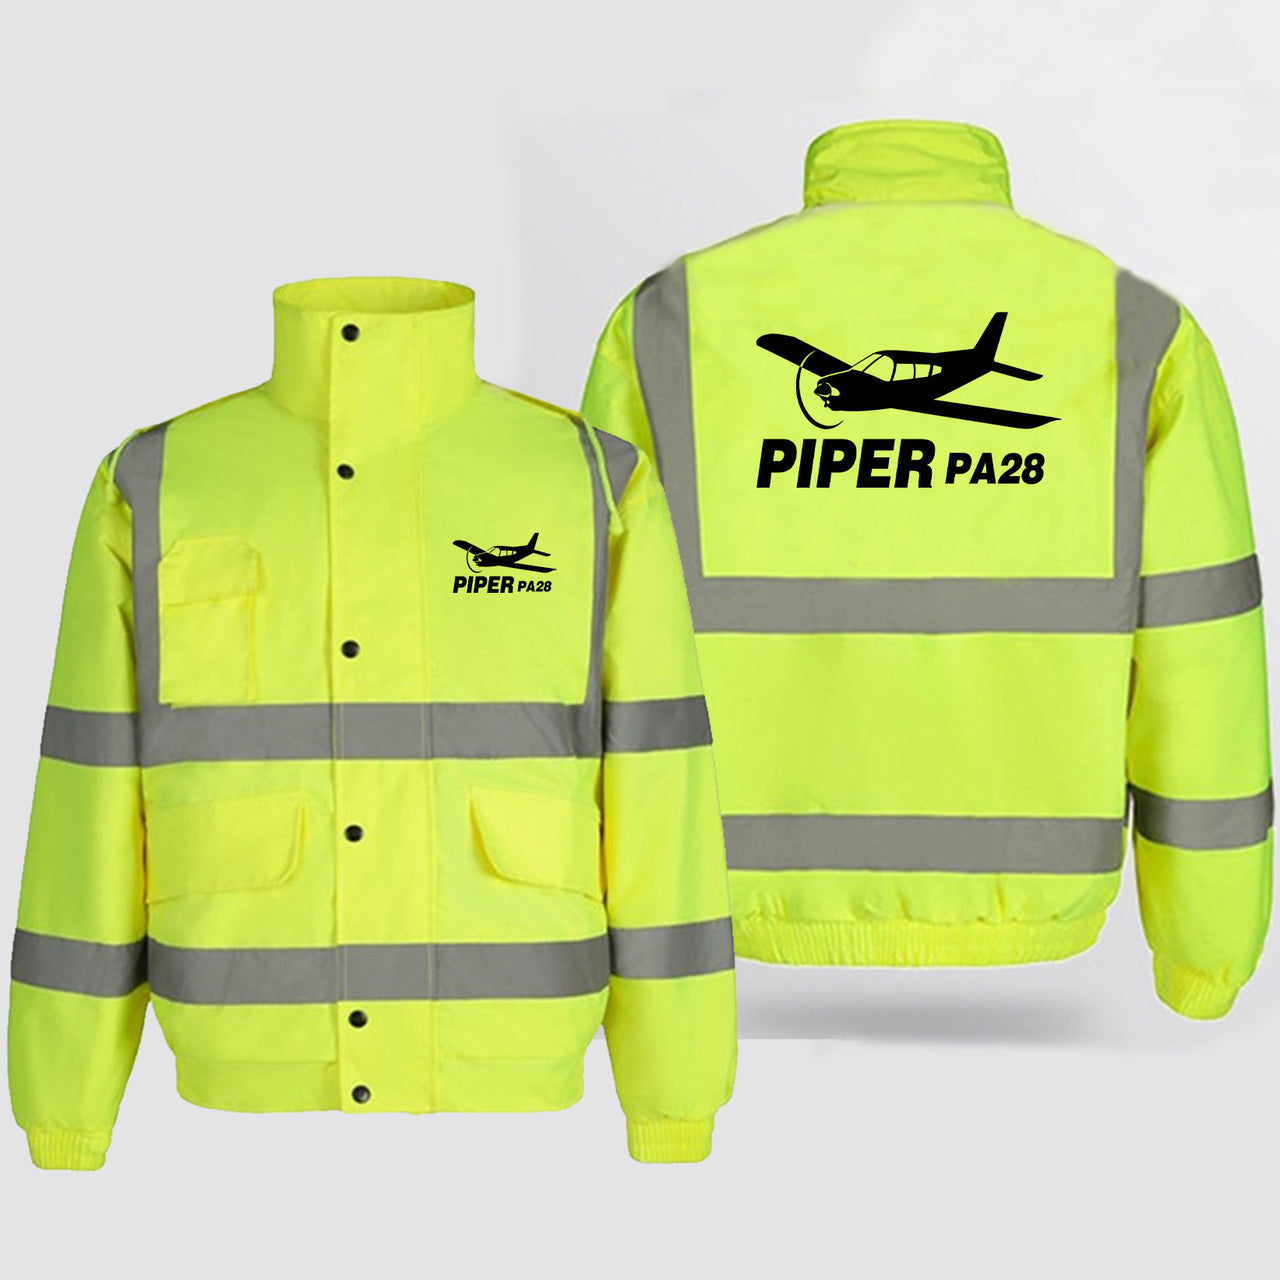 The Piper PA28 Designed Reflective Winter Jackets